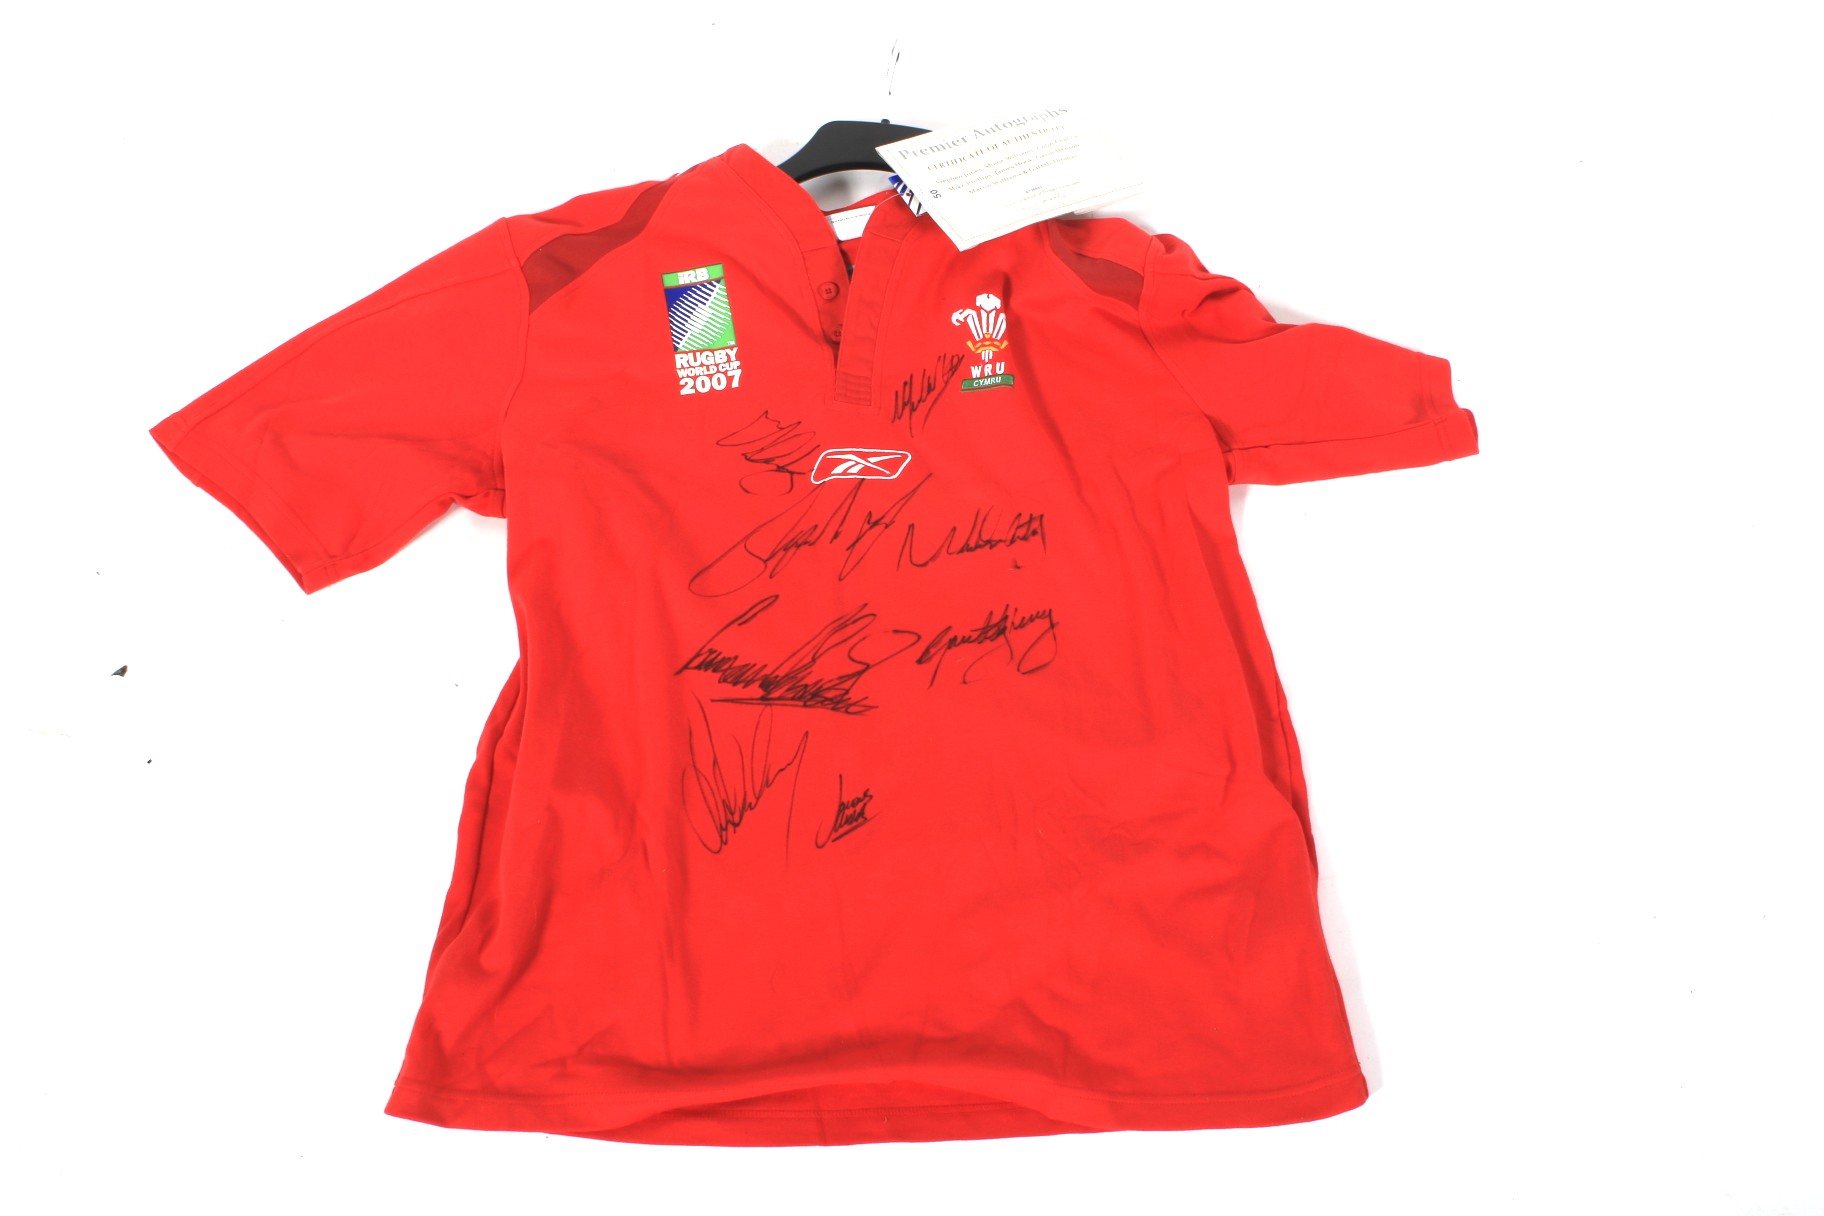 A signed Welsh 2007 Rugby shirt, with certificate.